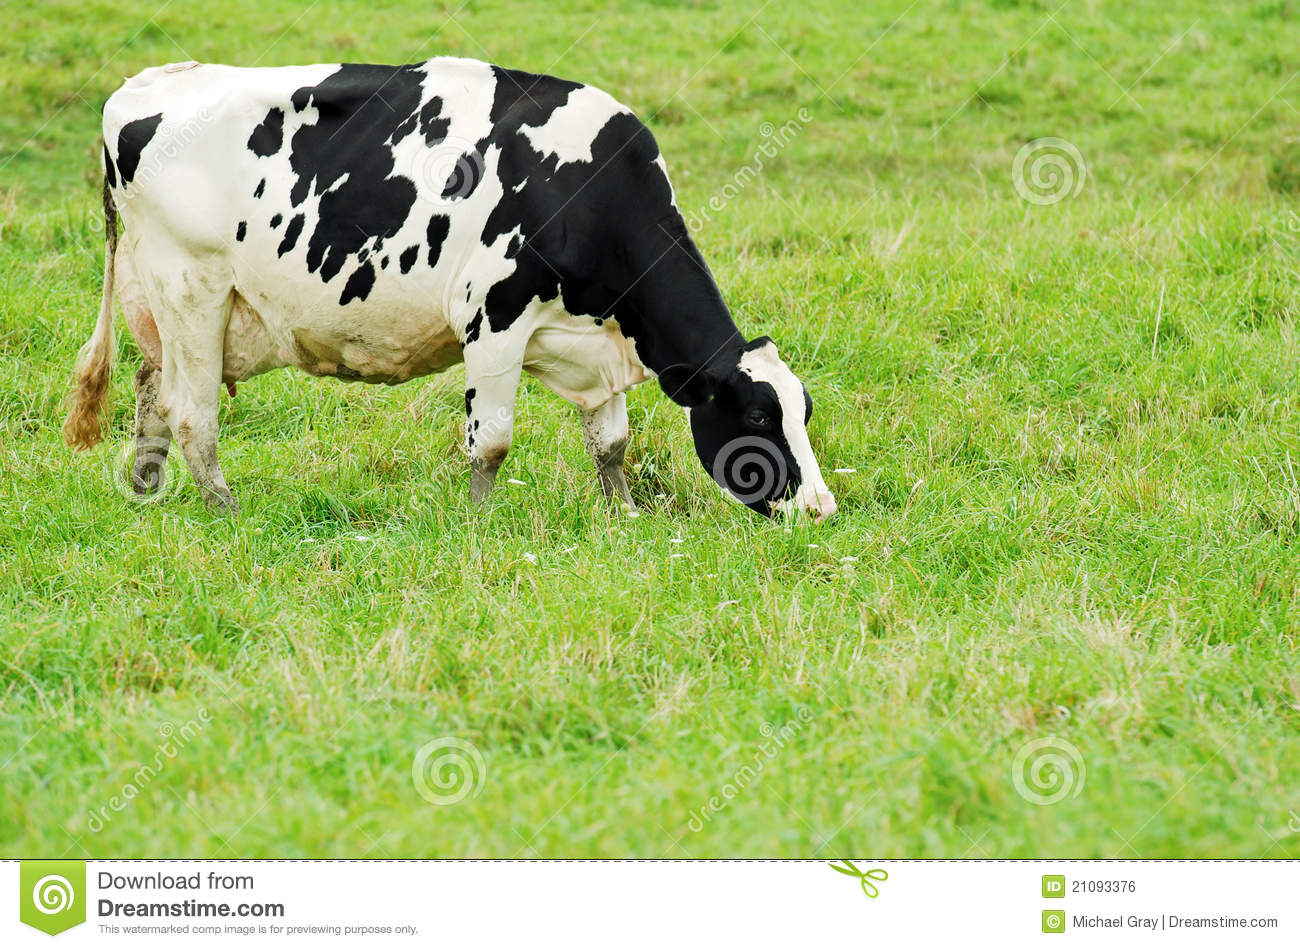 Female Holstein Cow Grazing Royalty Free Stock Image   Image  21093376